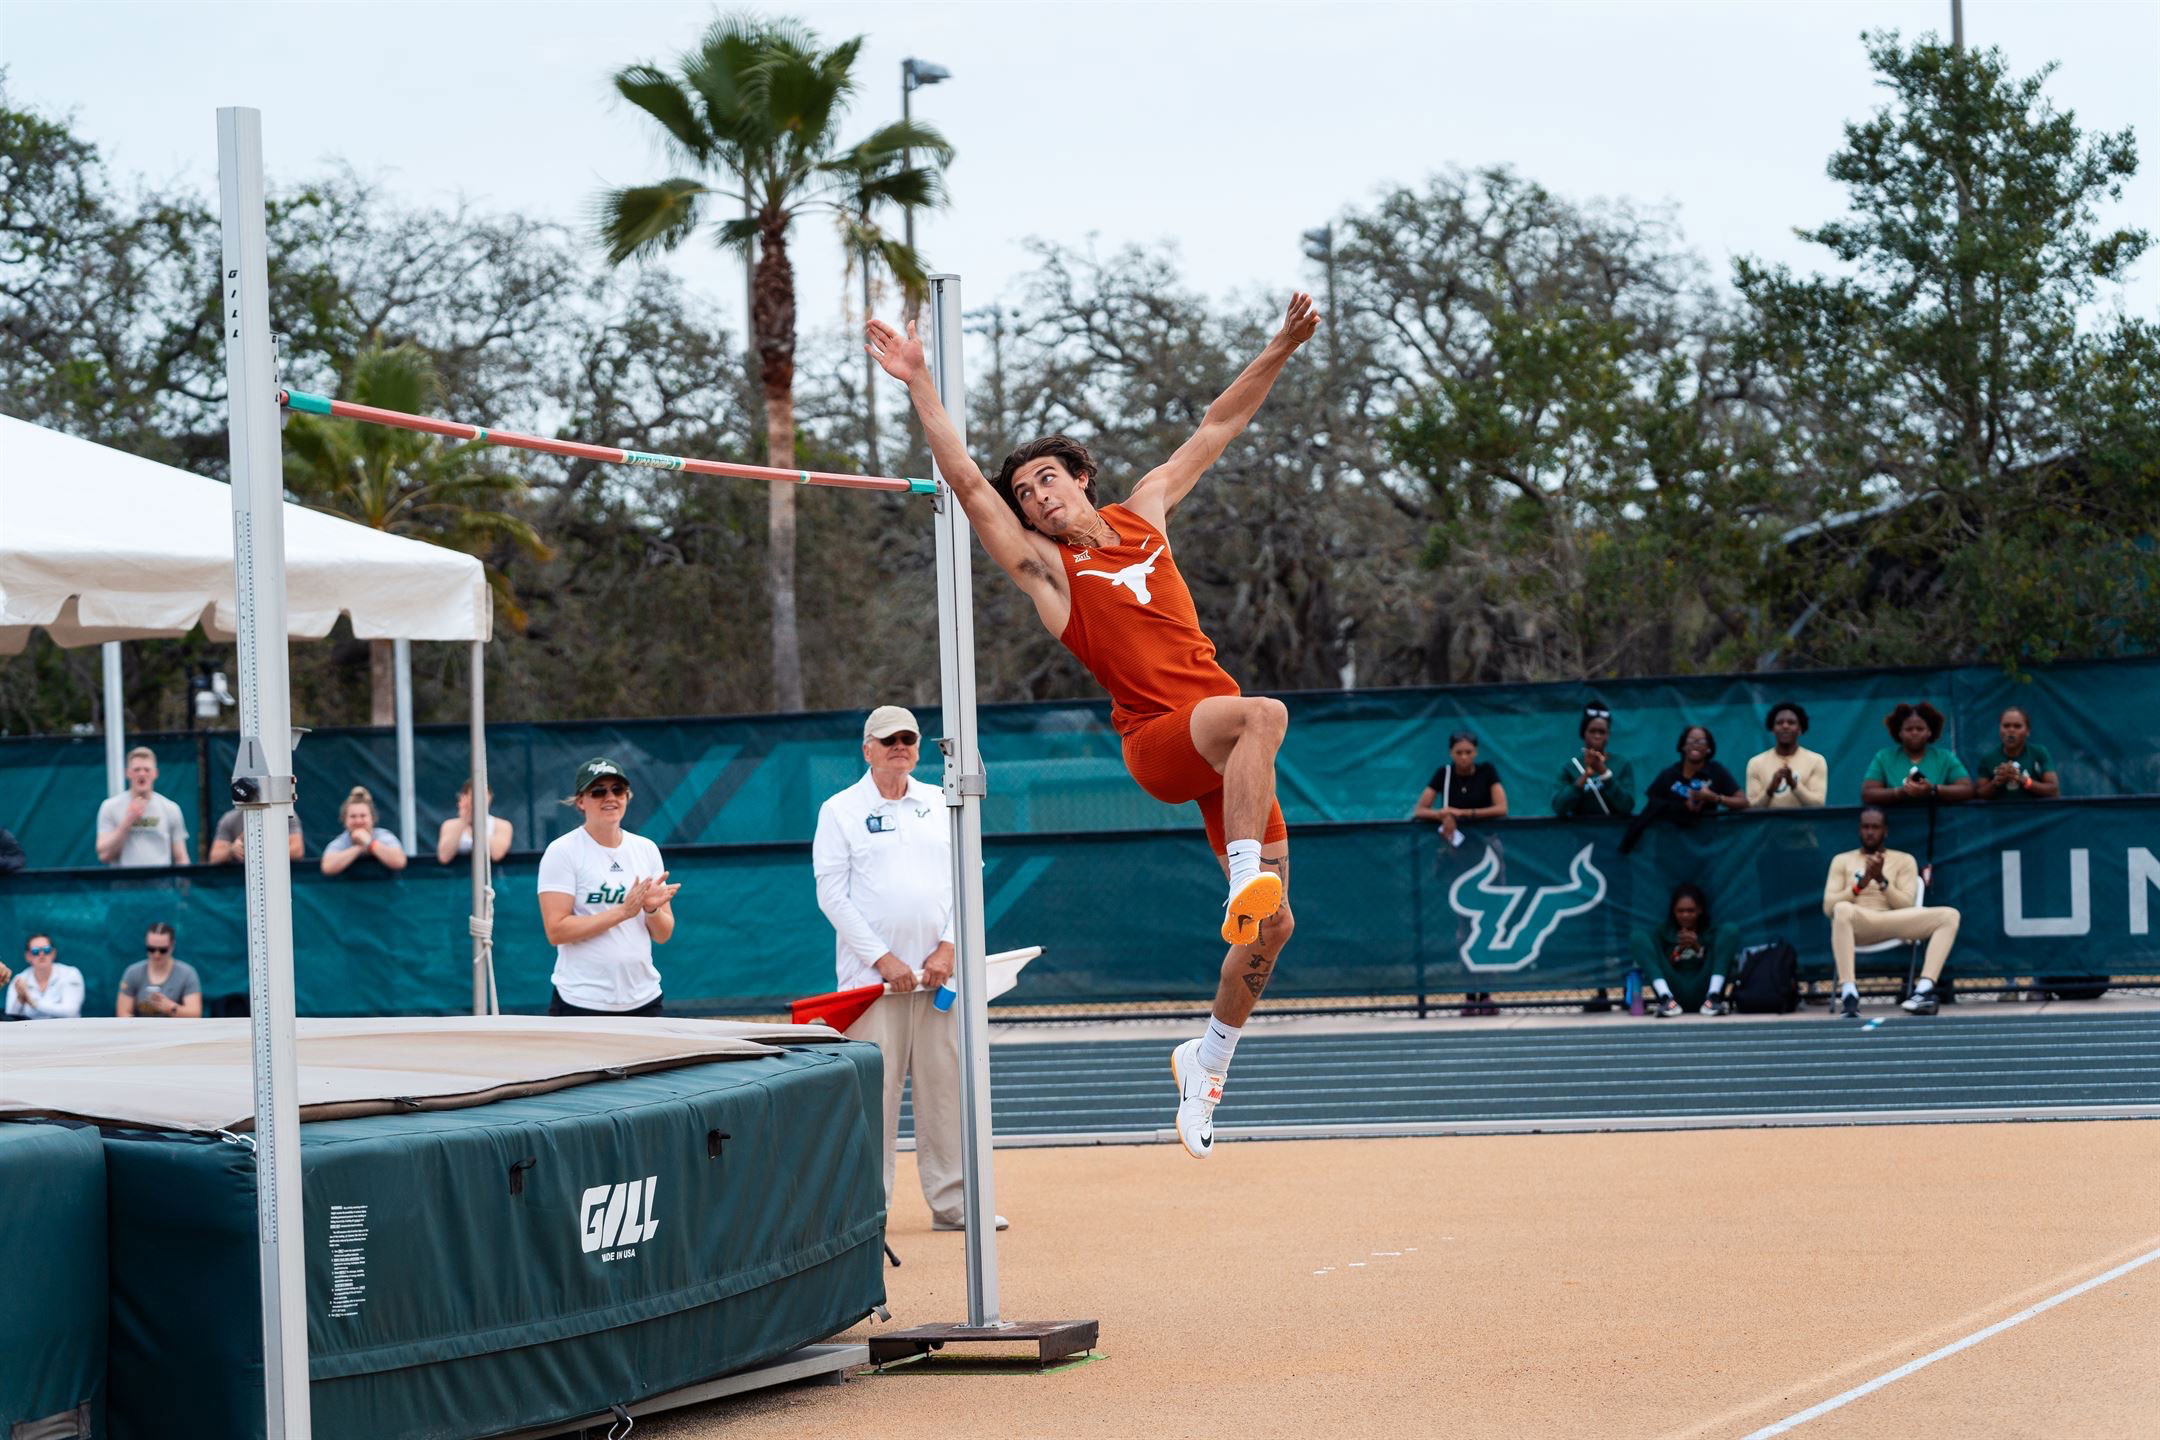 Sam Hurley leaping in a high jump competition, wearing a University of Texas uniform